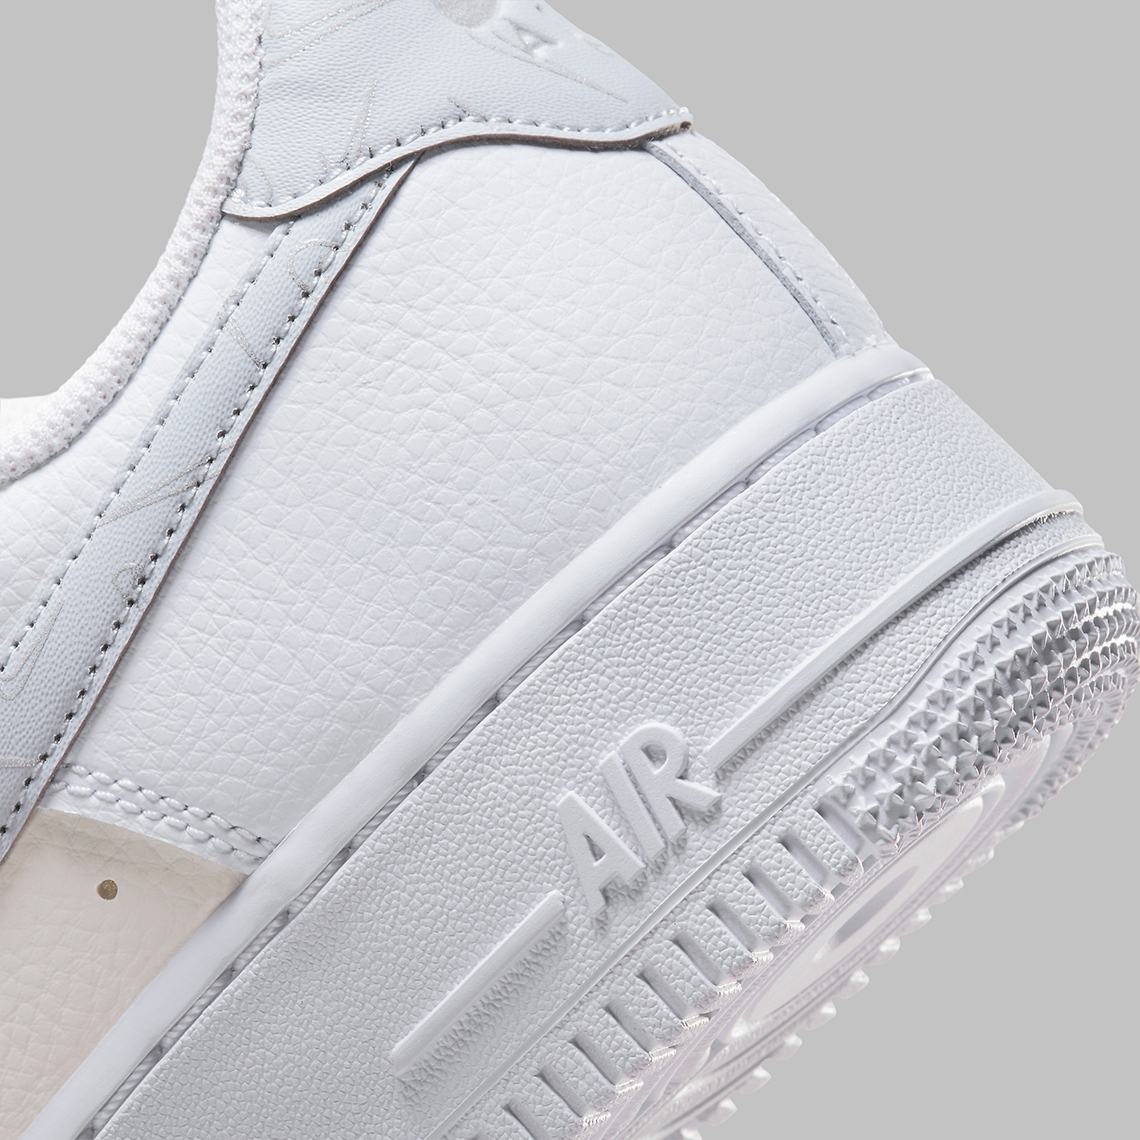 Nike Air Force 1 Low Utility White Silver FD0937-100 Release Date